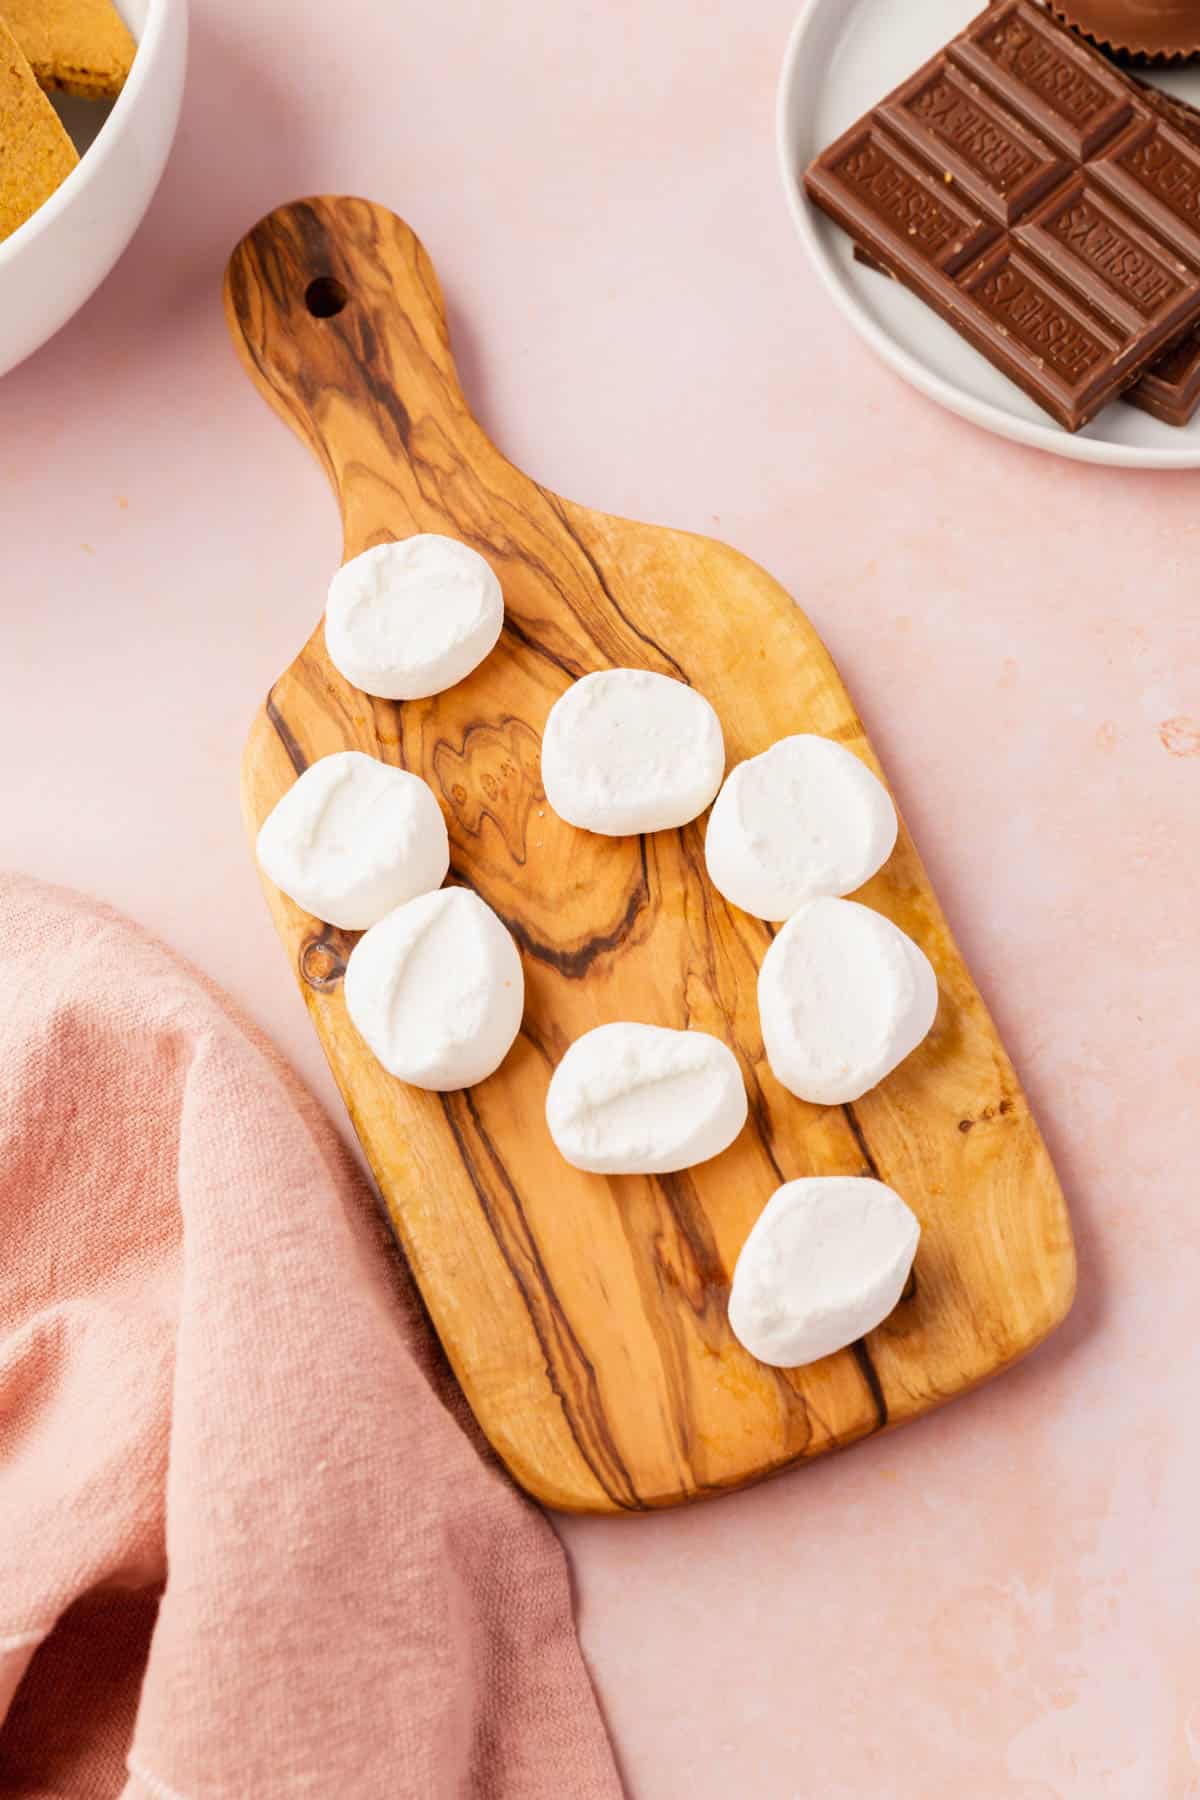 A small olivewood cutting board with eight marshmallows halves on it with a plate of chocolate bars on the side.